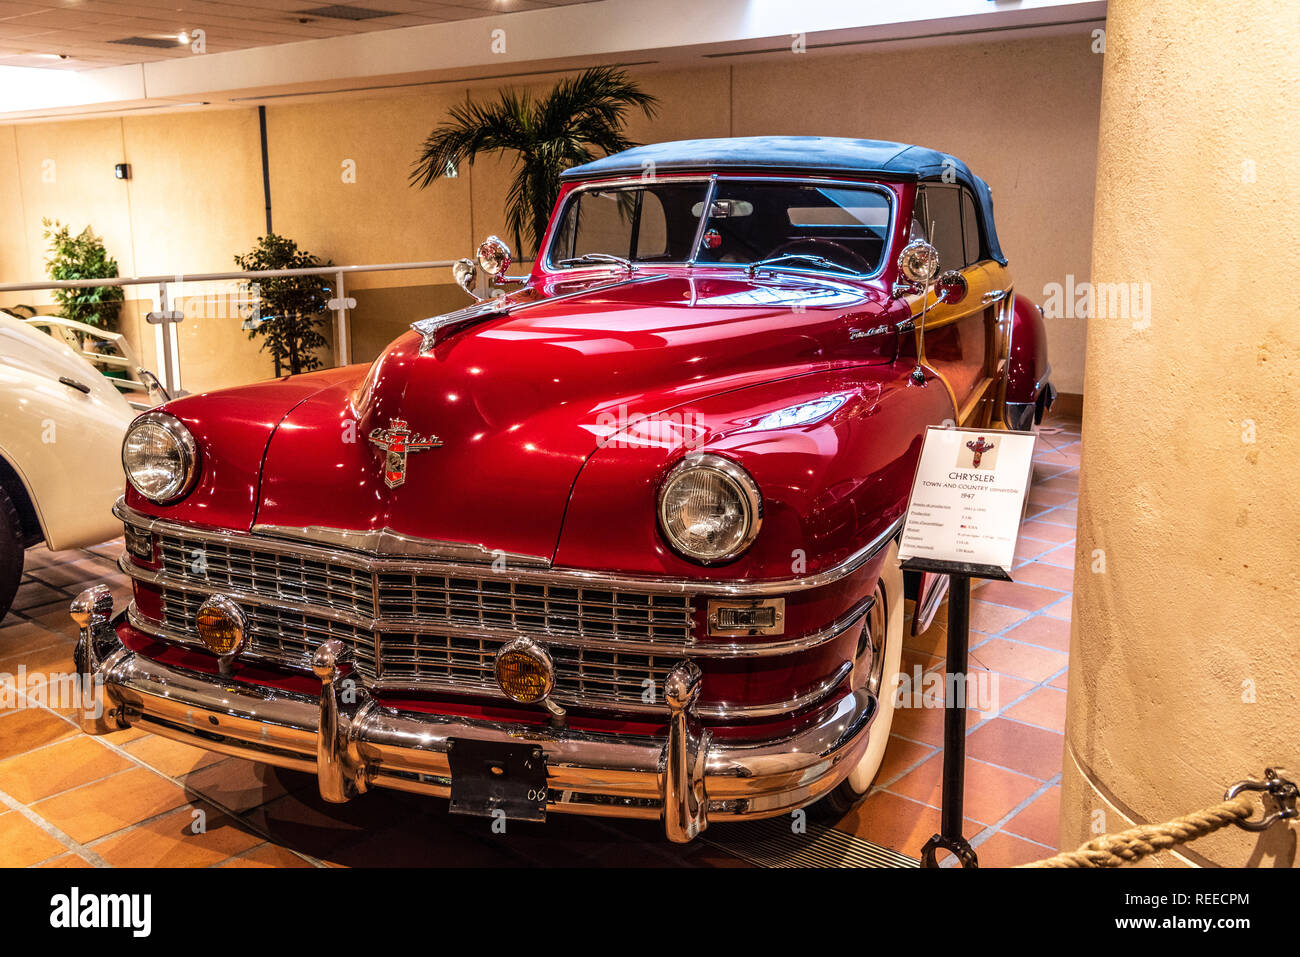 FONTVIEILLE, MONACO - JUN 2017: red CHRYSLER TOWN AND COUNTRY CONVERTIBLE 1947 in Monaco Top Cars Collection Museum. Stock Photo